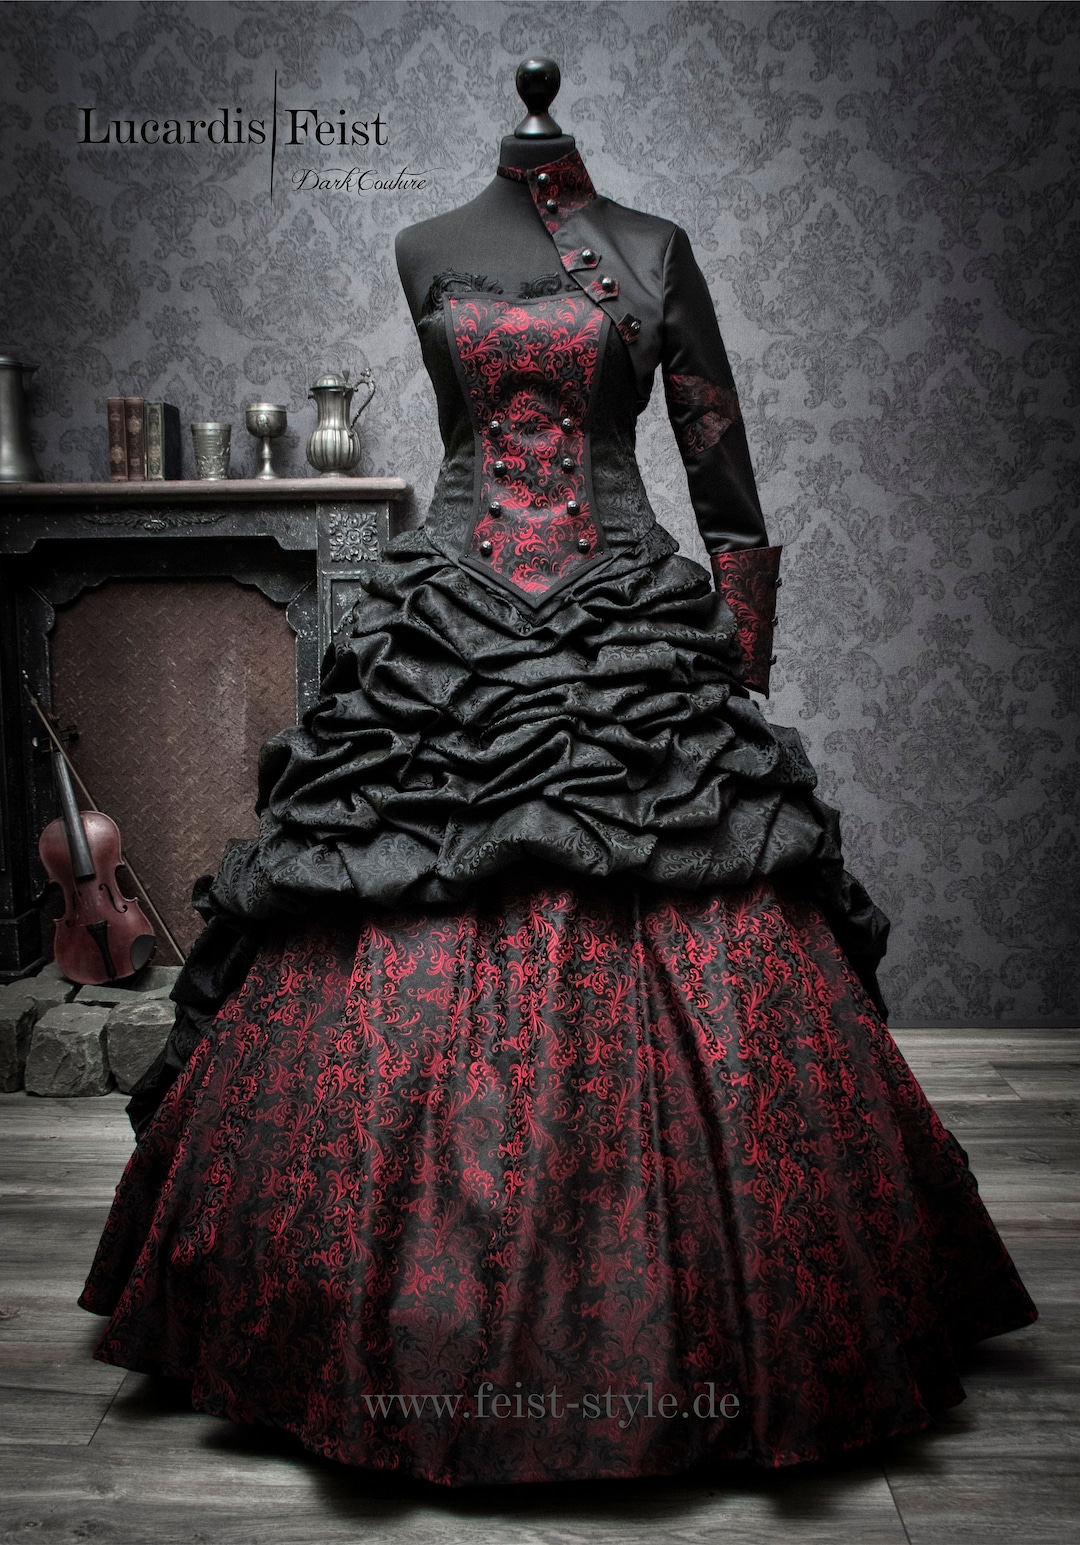 Gothic Black and Red Wedding Dresses Sweetheart A Line Tulle Bridal Ball  Gowns | eBay